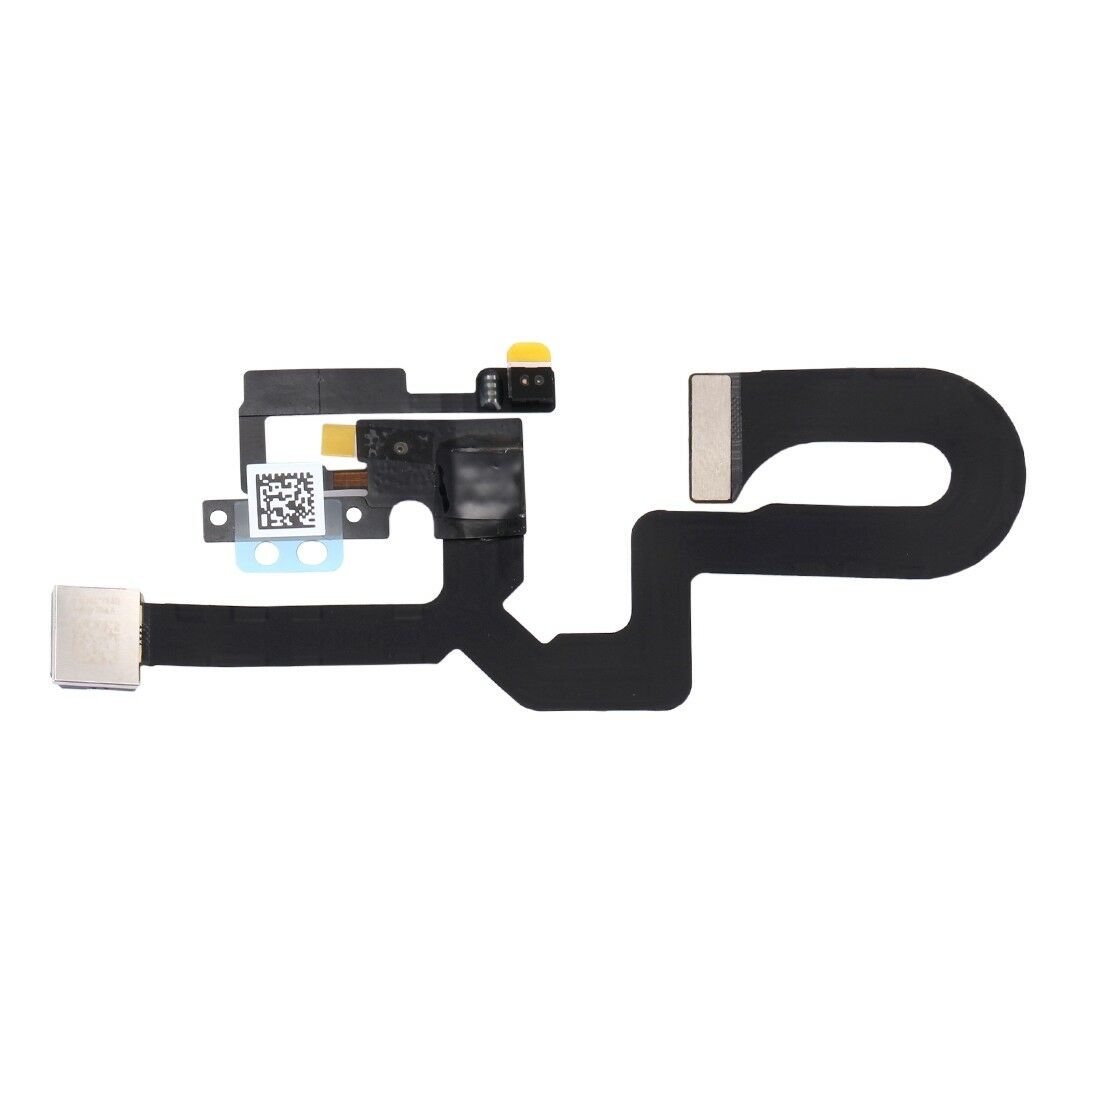 Apple iPhone 7 Plus Genuine Front camera Flex Cable for [product_price] - First Help Tech